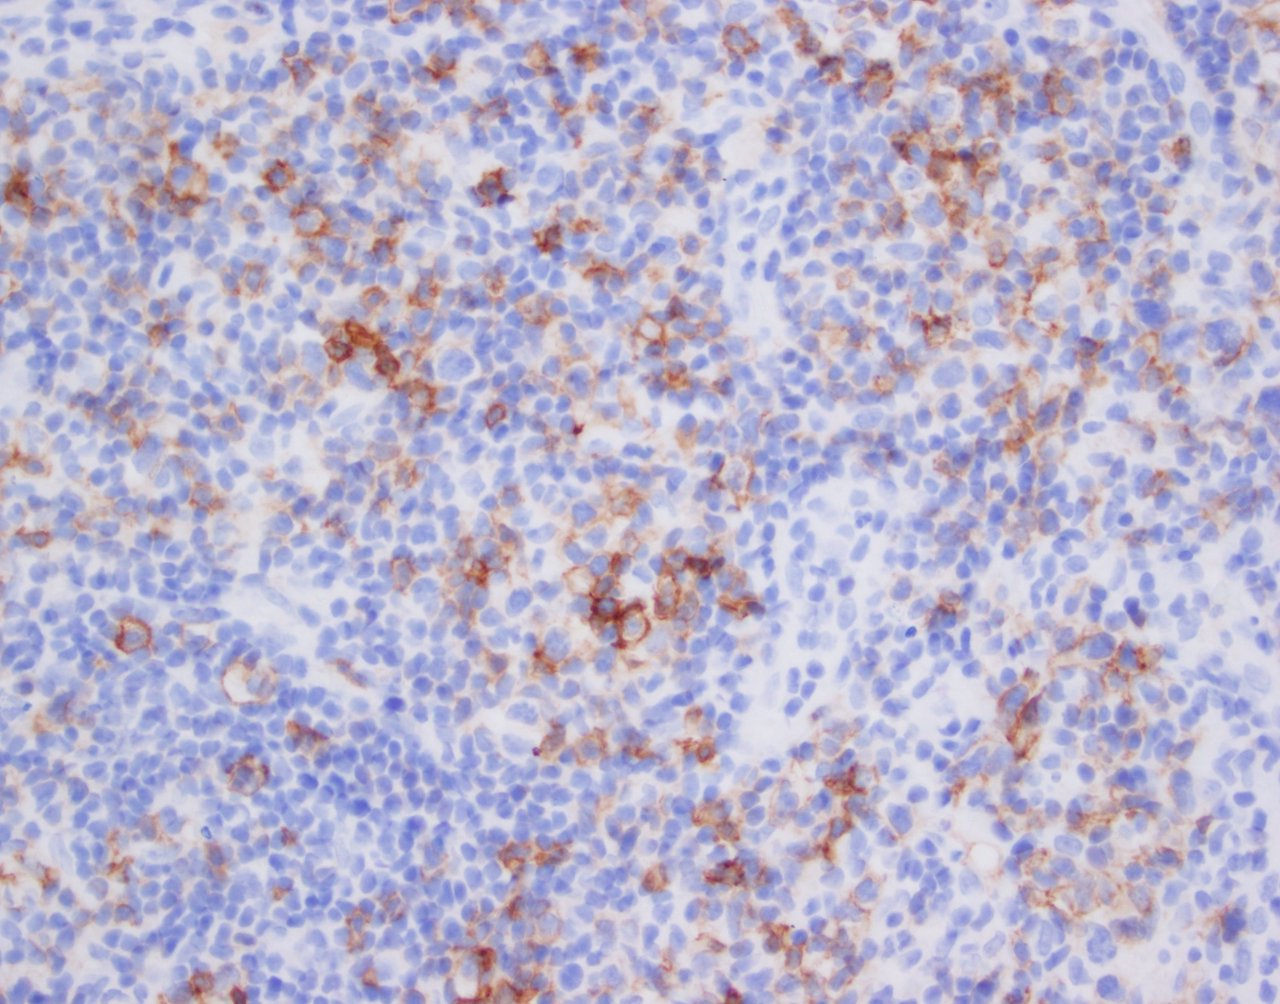 Neoplastic T cells showing strong ICOS expression